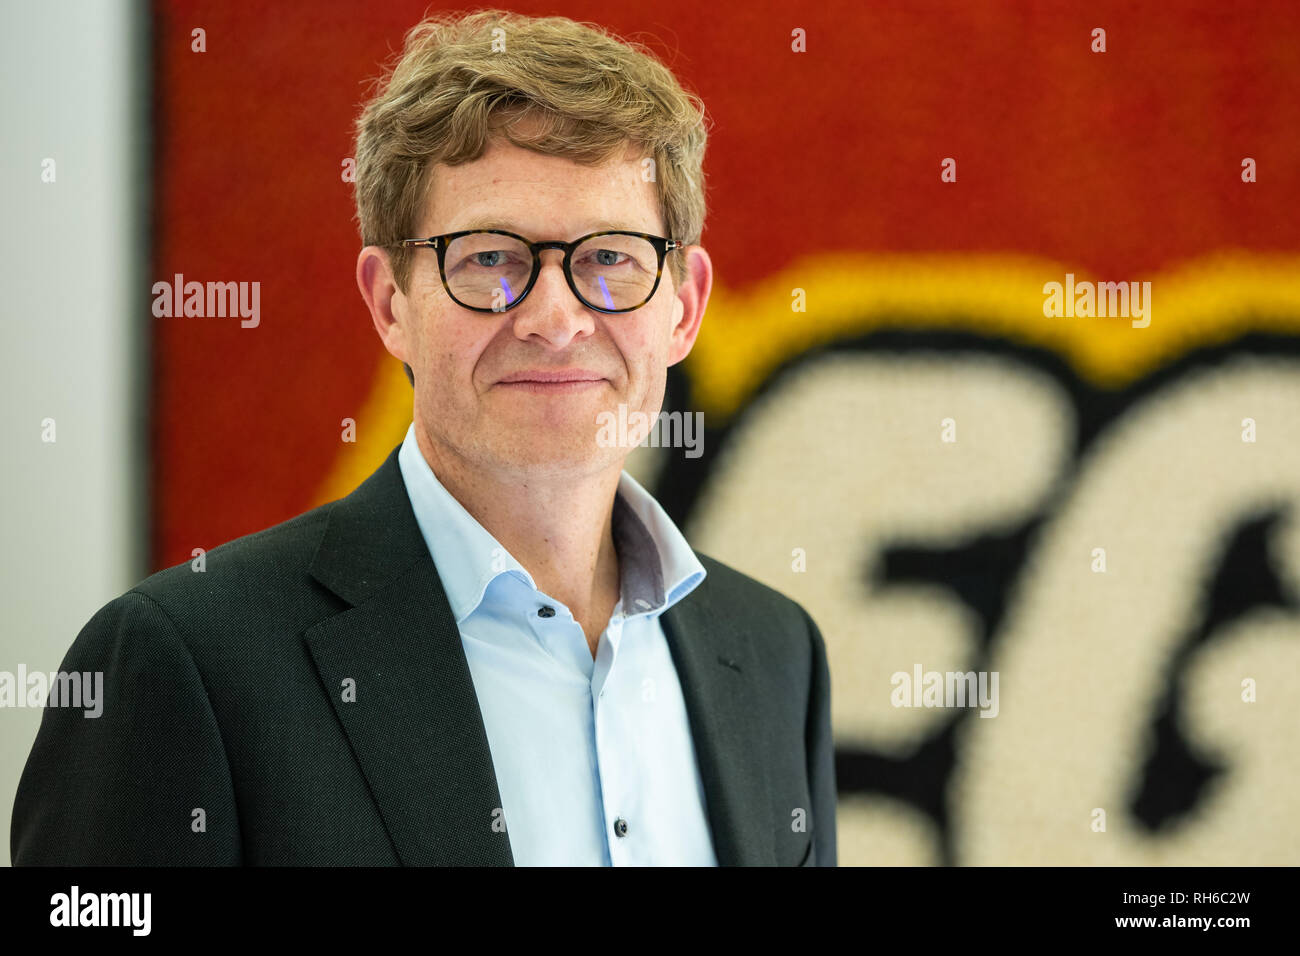 30 January 2019, Bavaria, Nürnberg: Niels B. Christiansen, Managing  Director of the Danish toy manufacturer Lego, will be a guest at the  International Toy Fair 2019. Photo: Daniel Karmann/dpa Stock Photo - Alamy